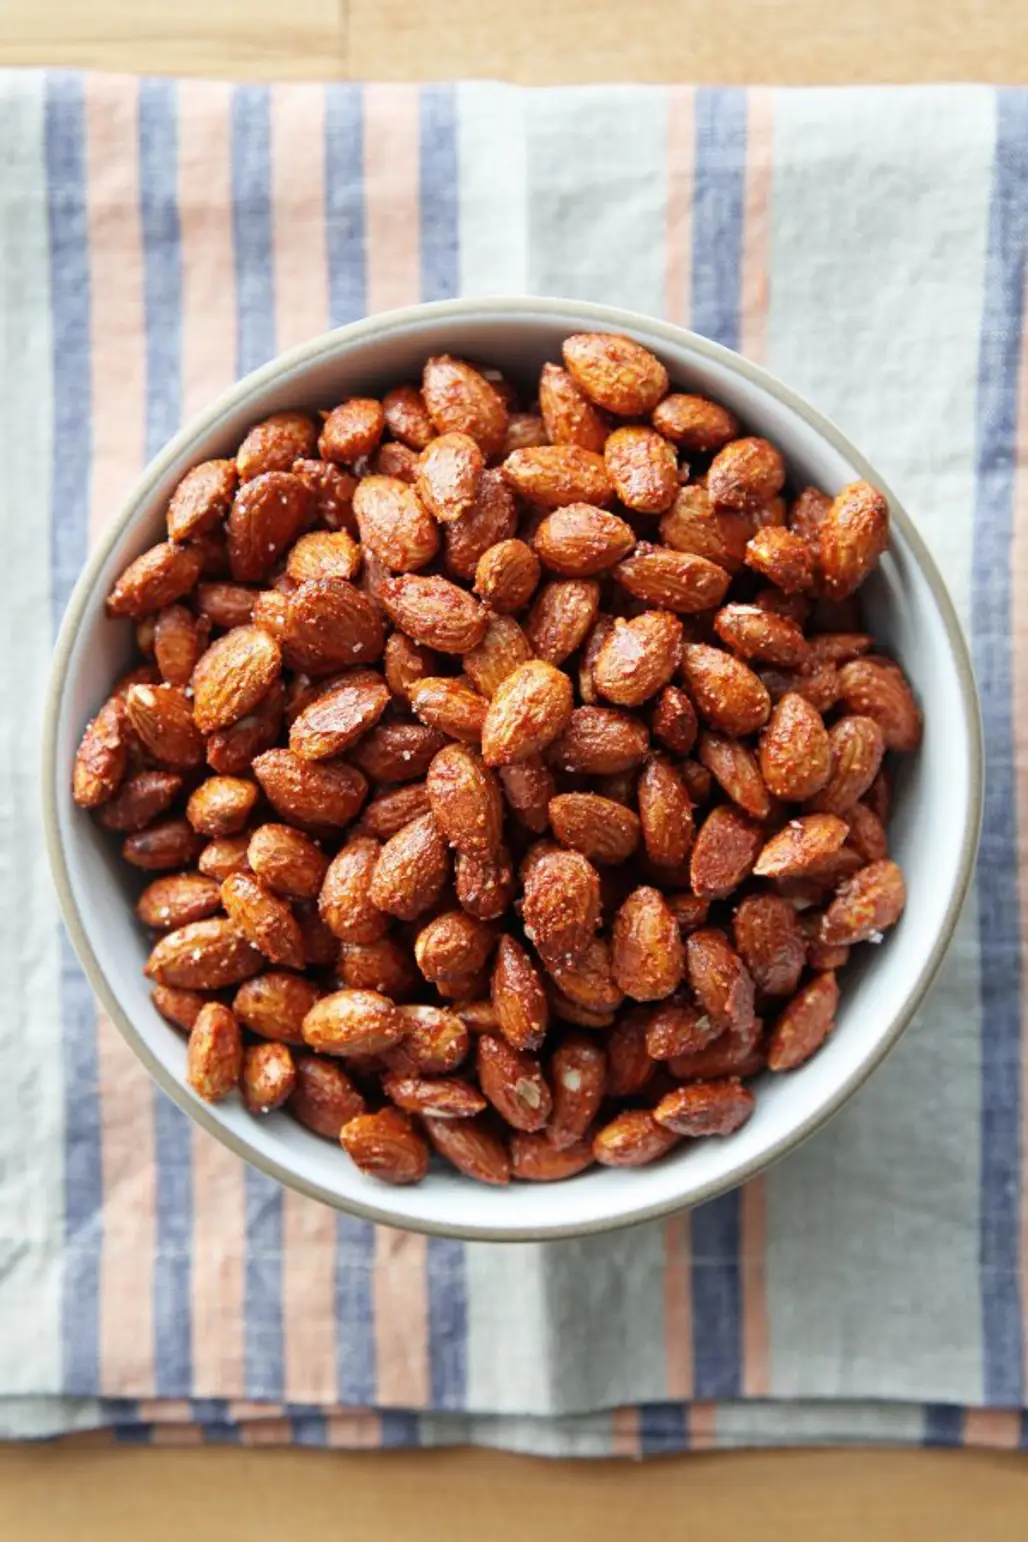 You Can Never Go Wrong with a Handful of Almonds